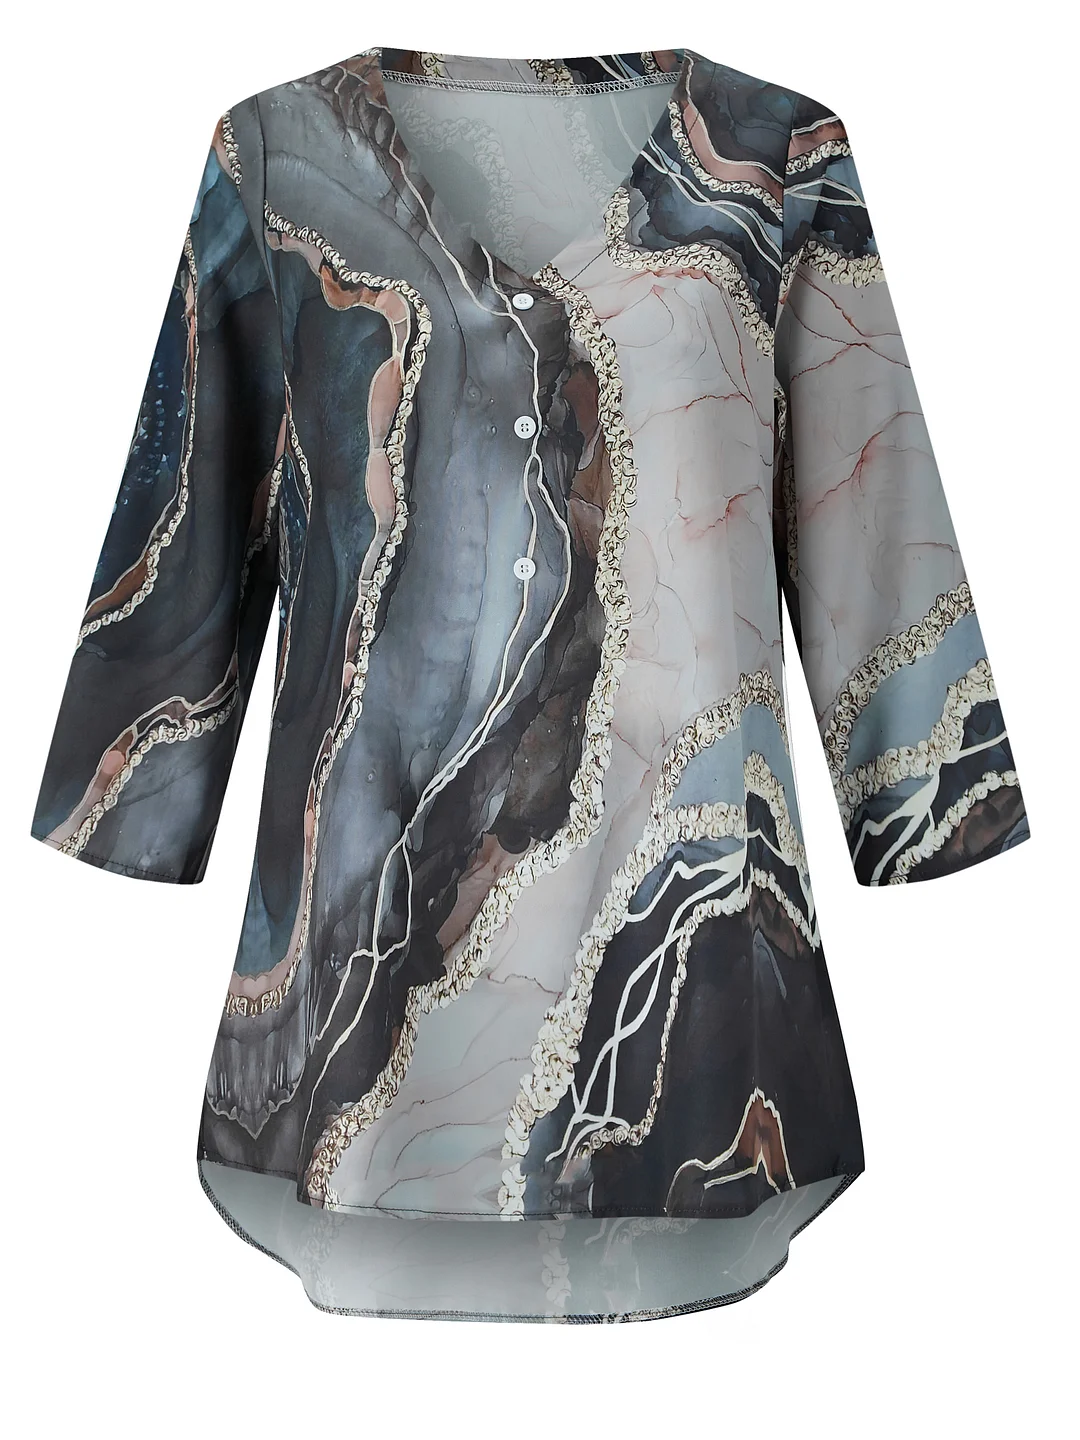 Style & Comfort for Mature Women Attractive Collared Print Top